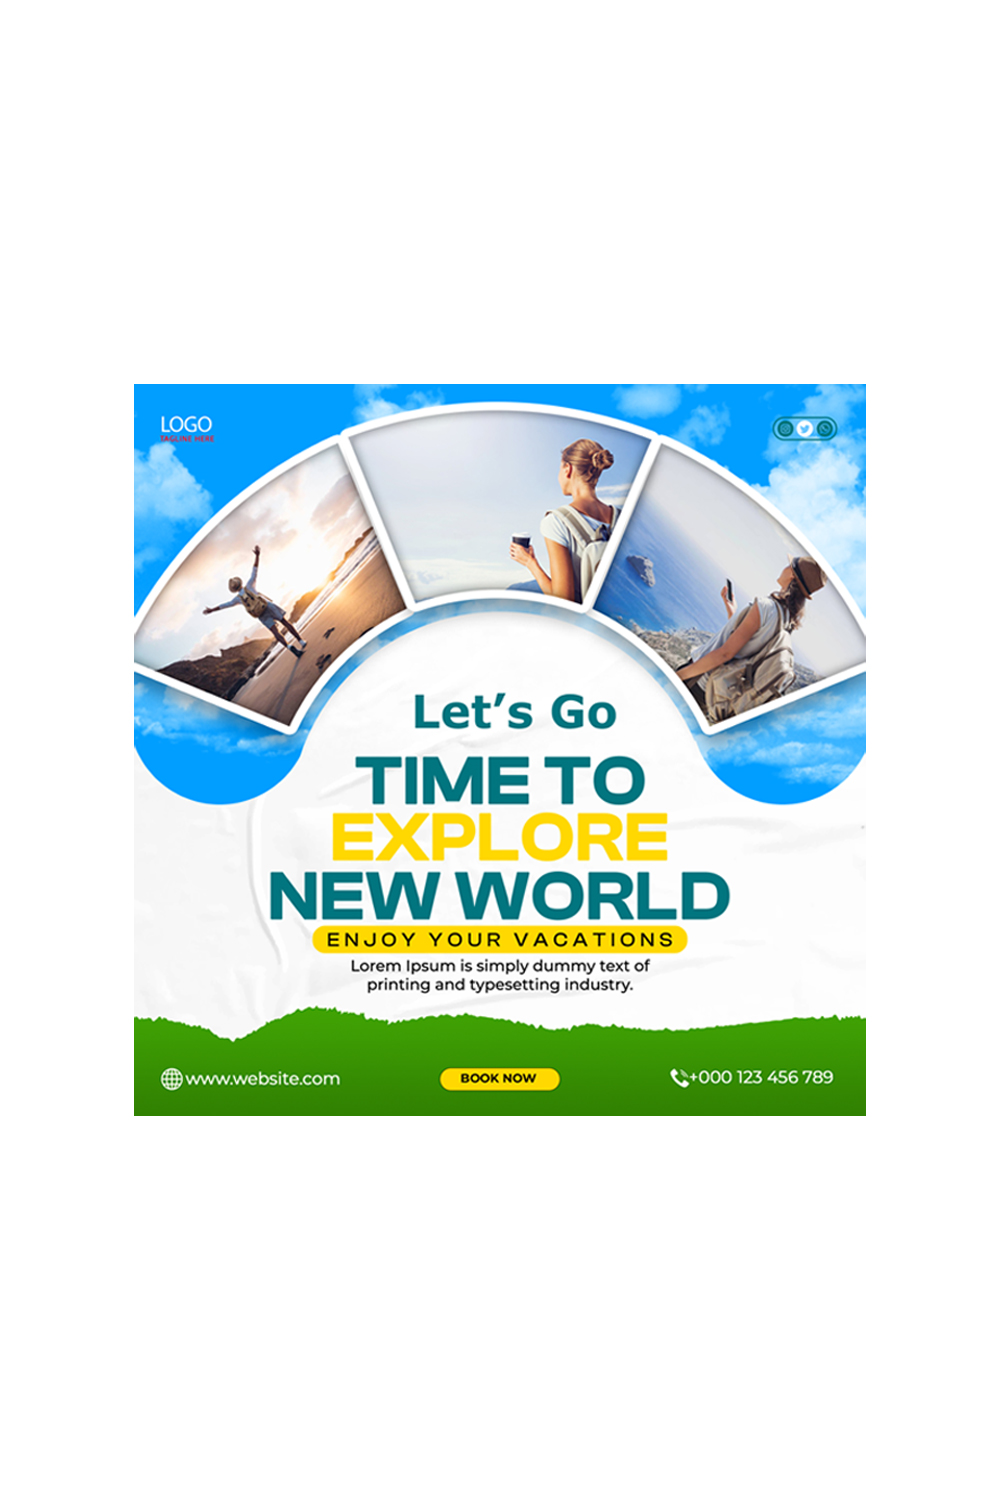 Flyer Design time to world vacations pinterest preview image.